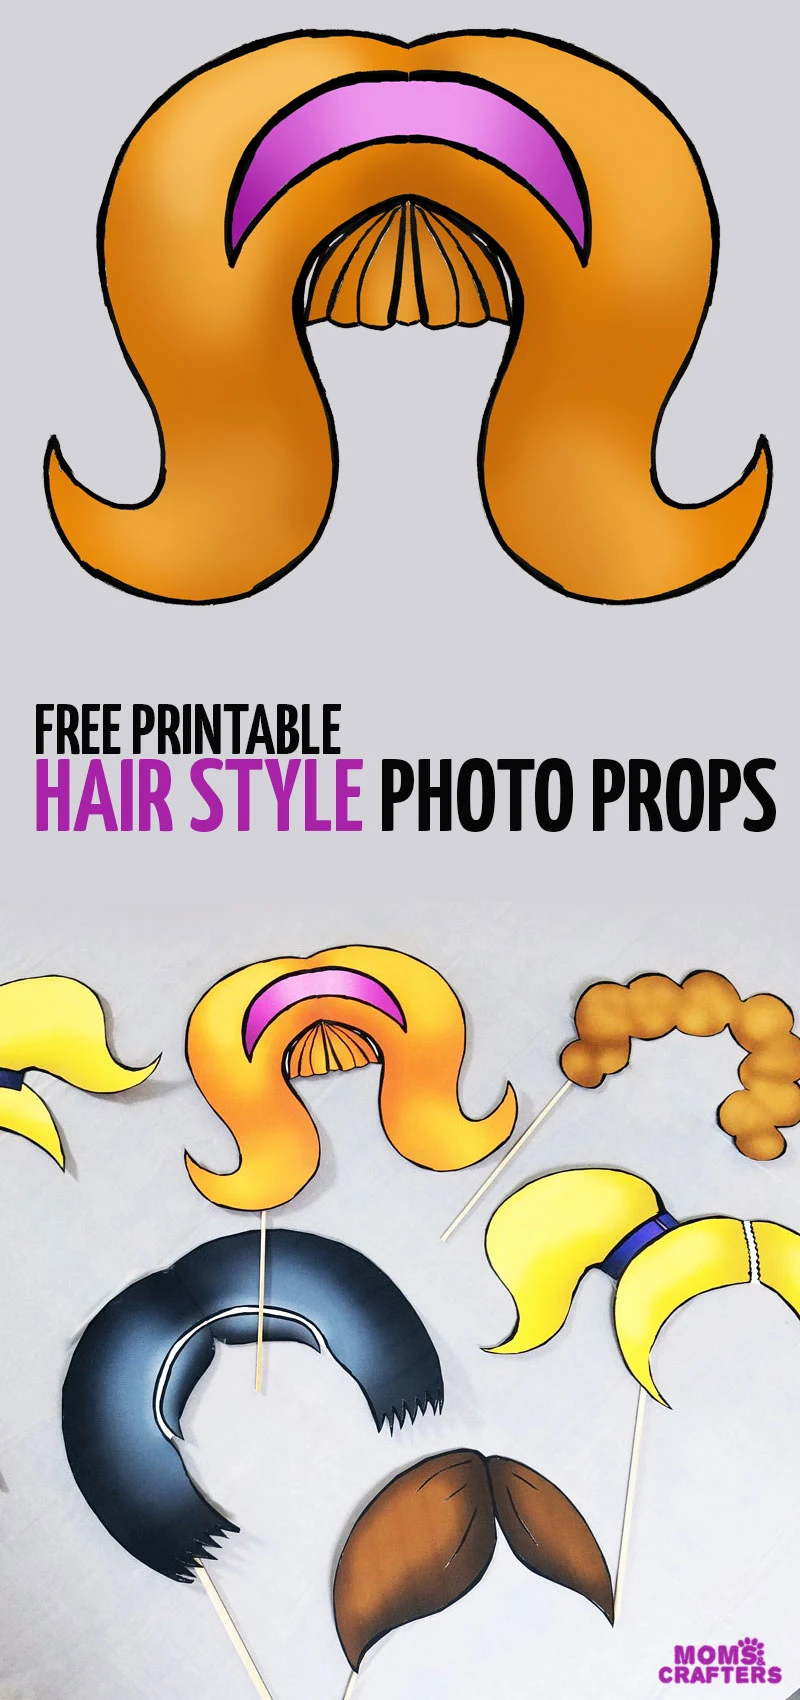 These free printable photo booth props are so adorable - great for dress up, dramatic play, a birthday party theme and more! It went along with a fun instant photo booth at a barber shop party and is perfect for DIY easy photo props to make for a kids or teens birthday party.